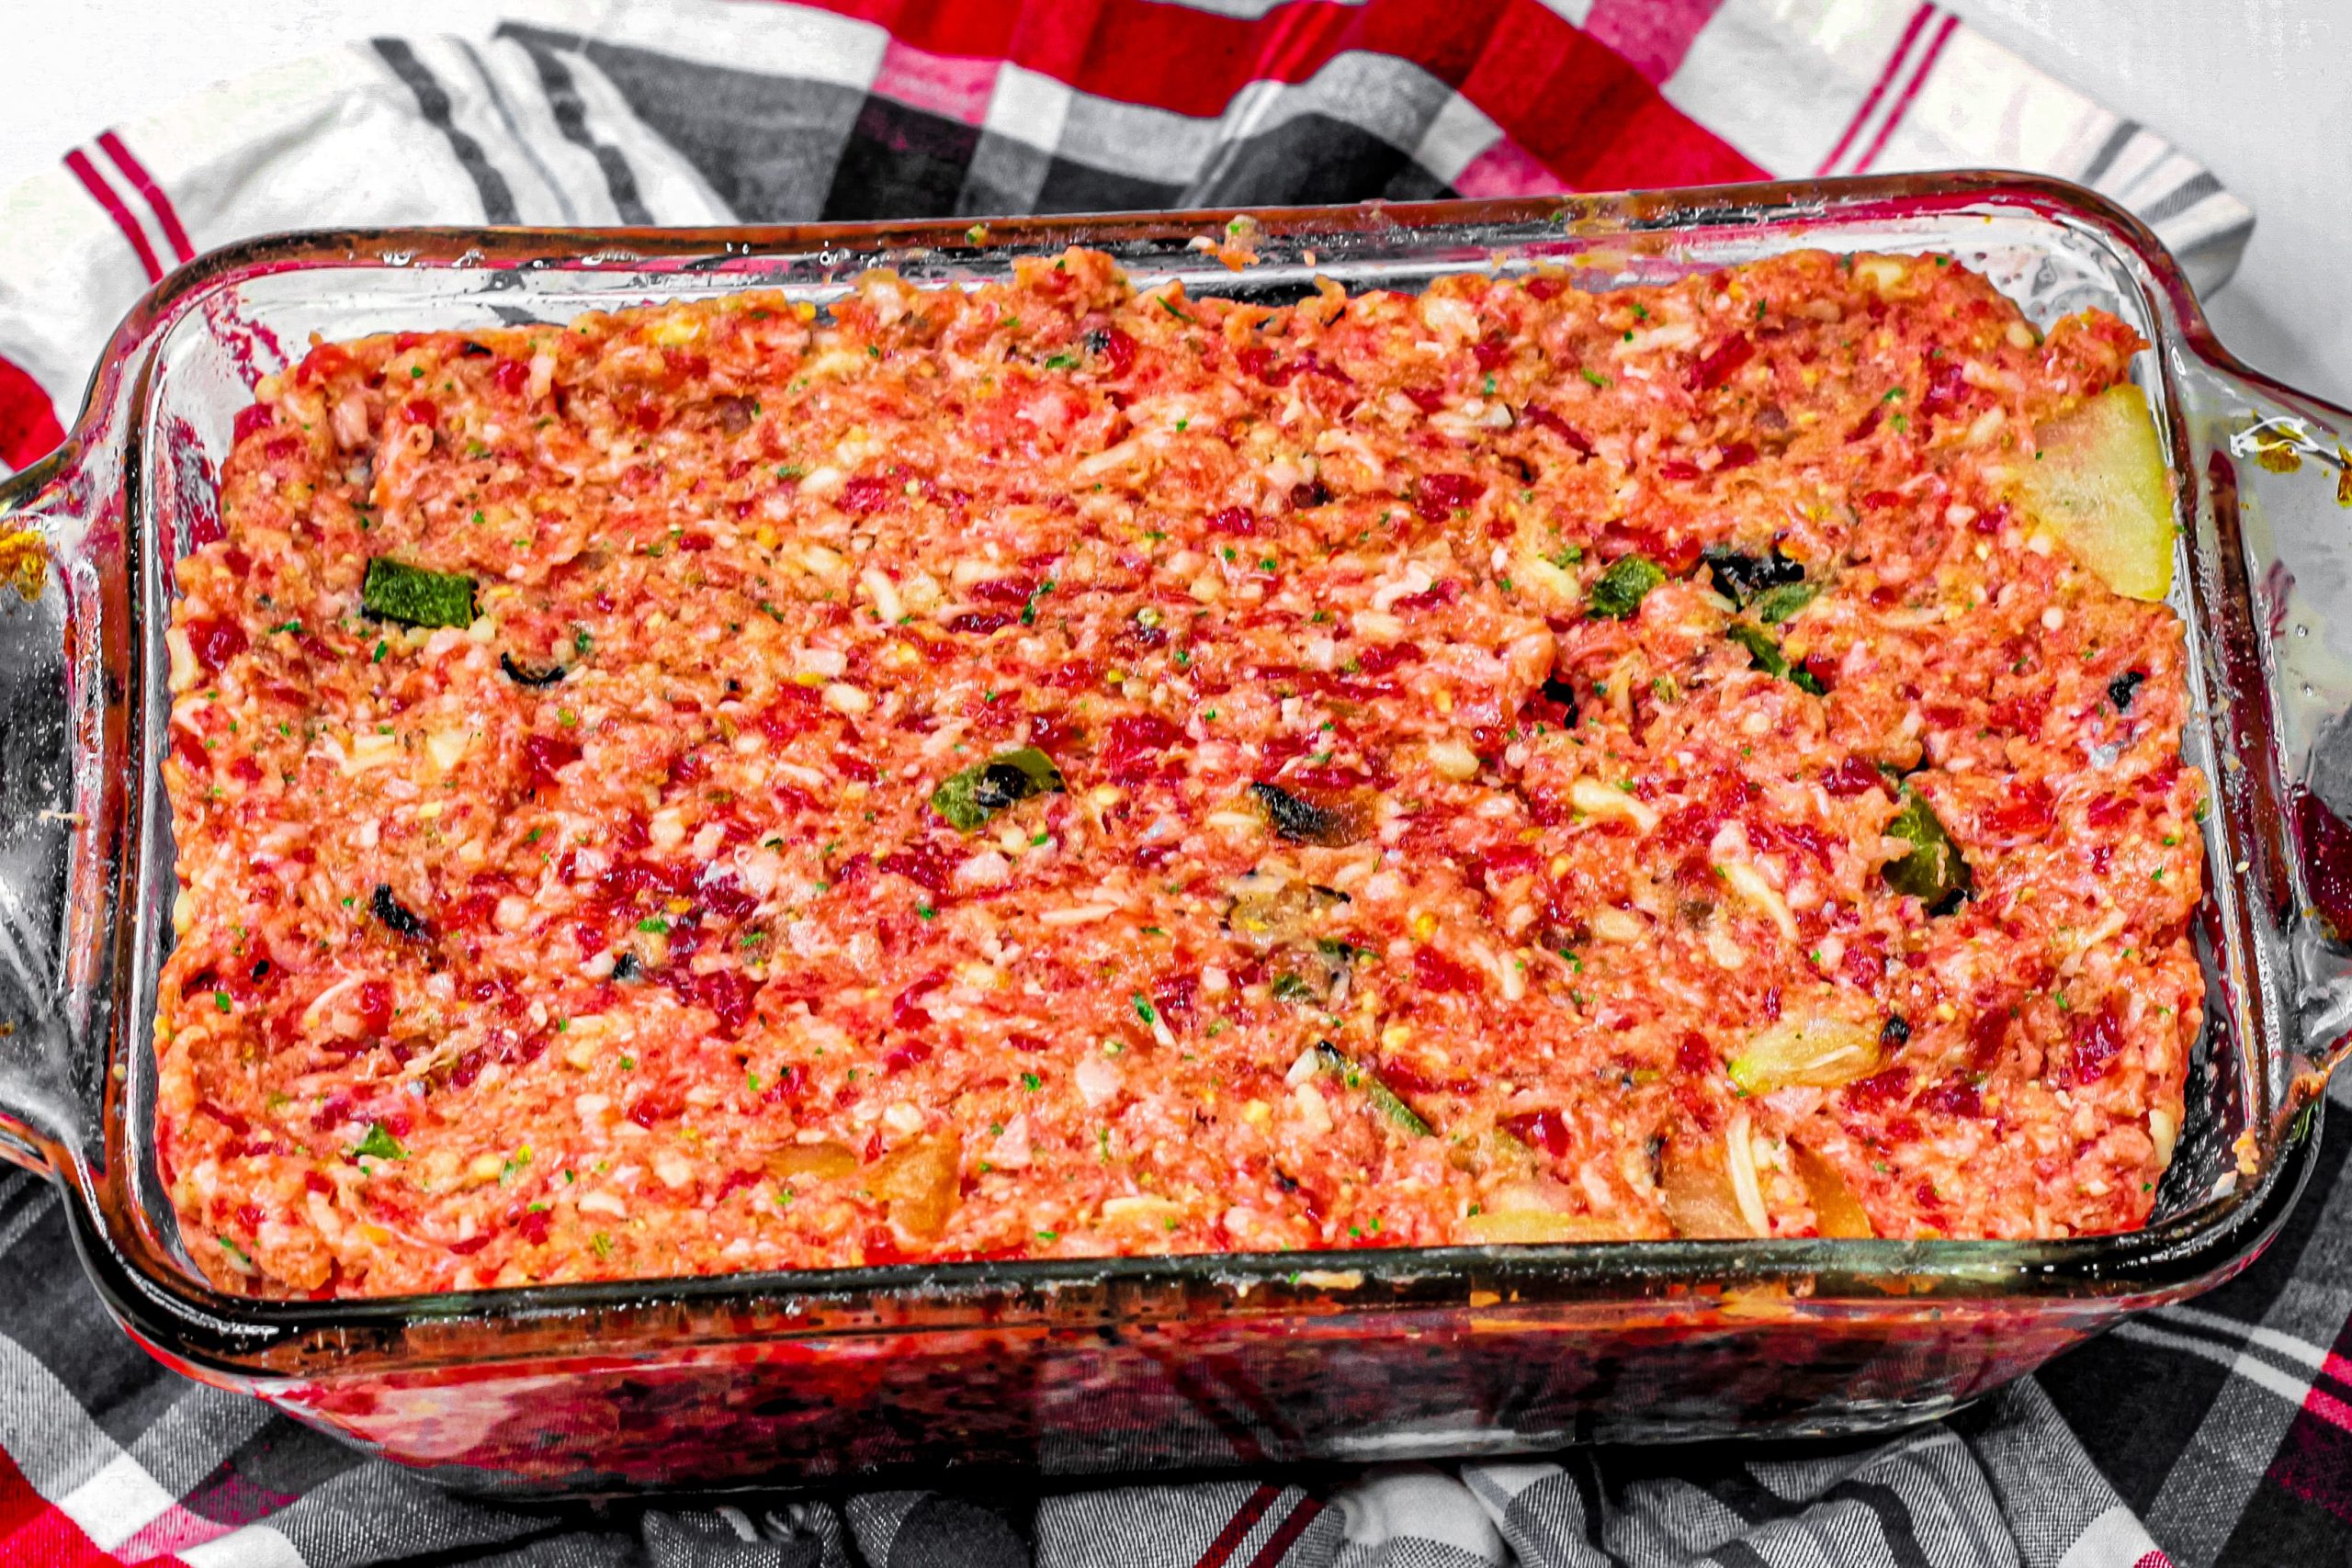 Place the meatloaf mixture into a loaf pan, press to evenly distribute the meatloaf mixture.